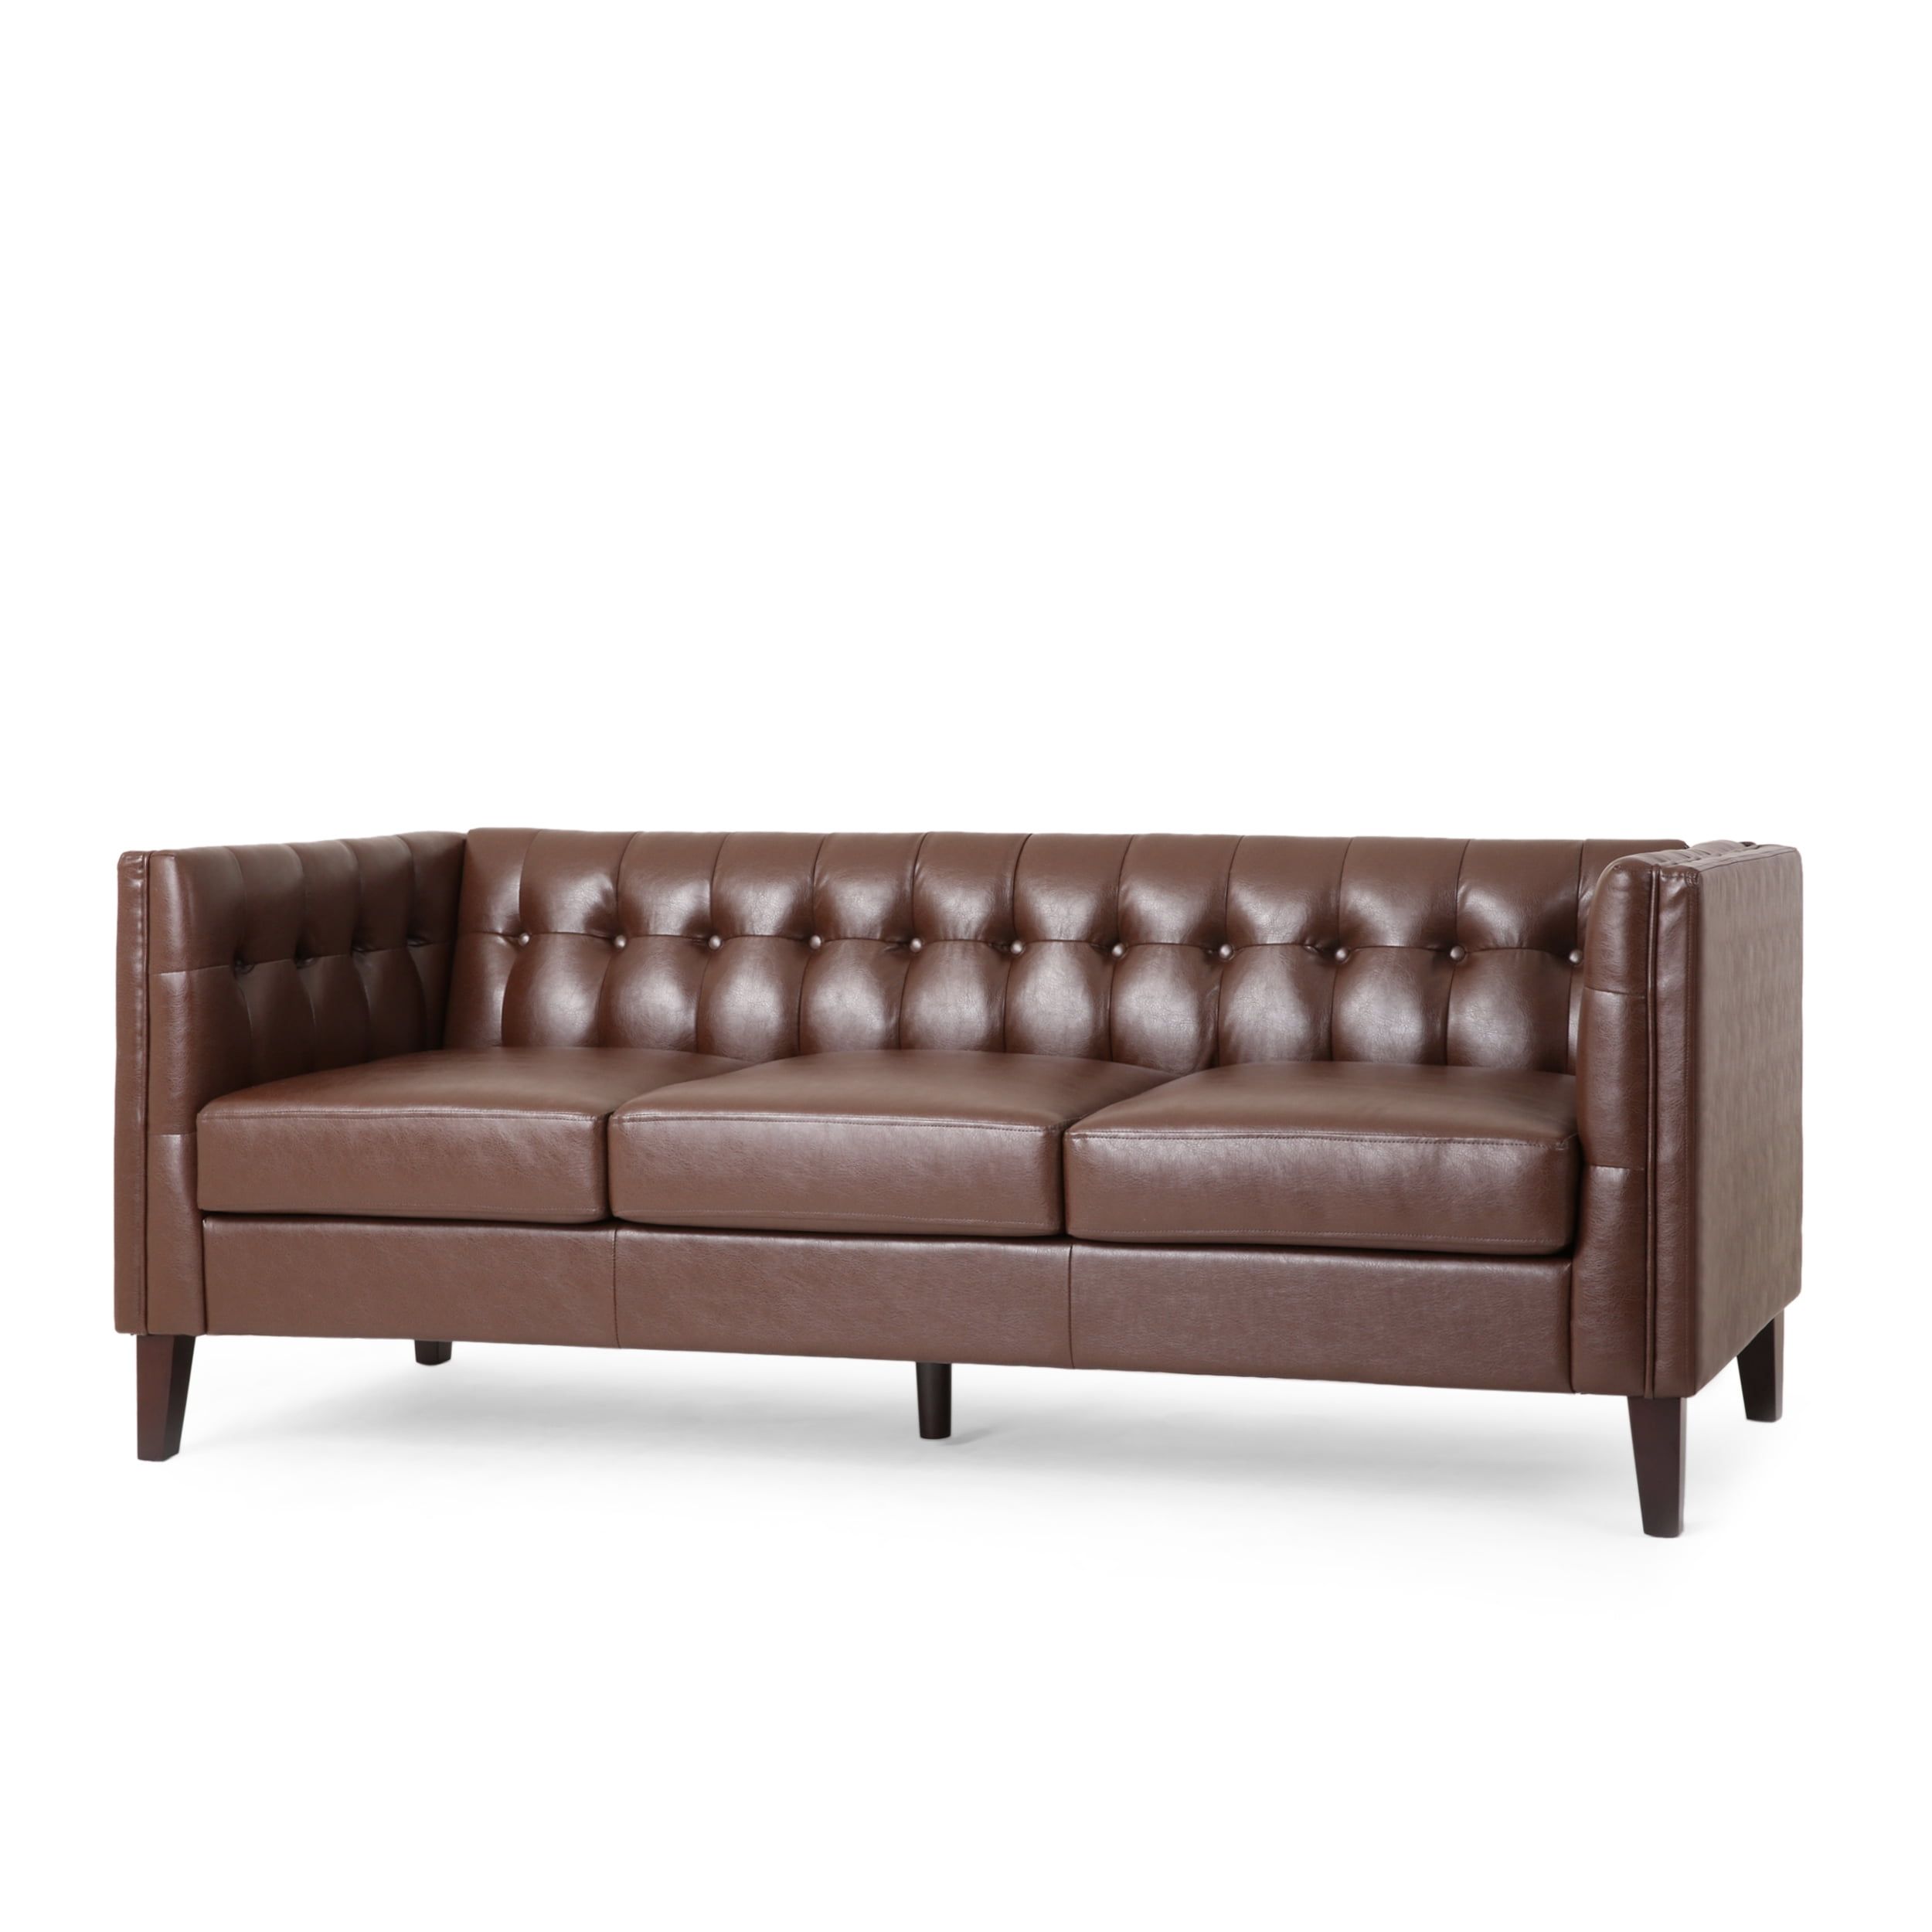 Noble House Sadlier Faux Leather Tufted 3 Seater Sofa, Dark Brown –  Walmart Within Faux Leather Sofas In Dark Brown (View 15 of 15)